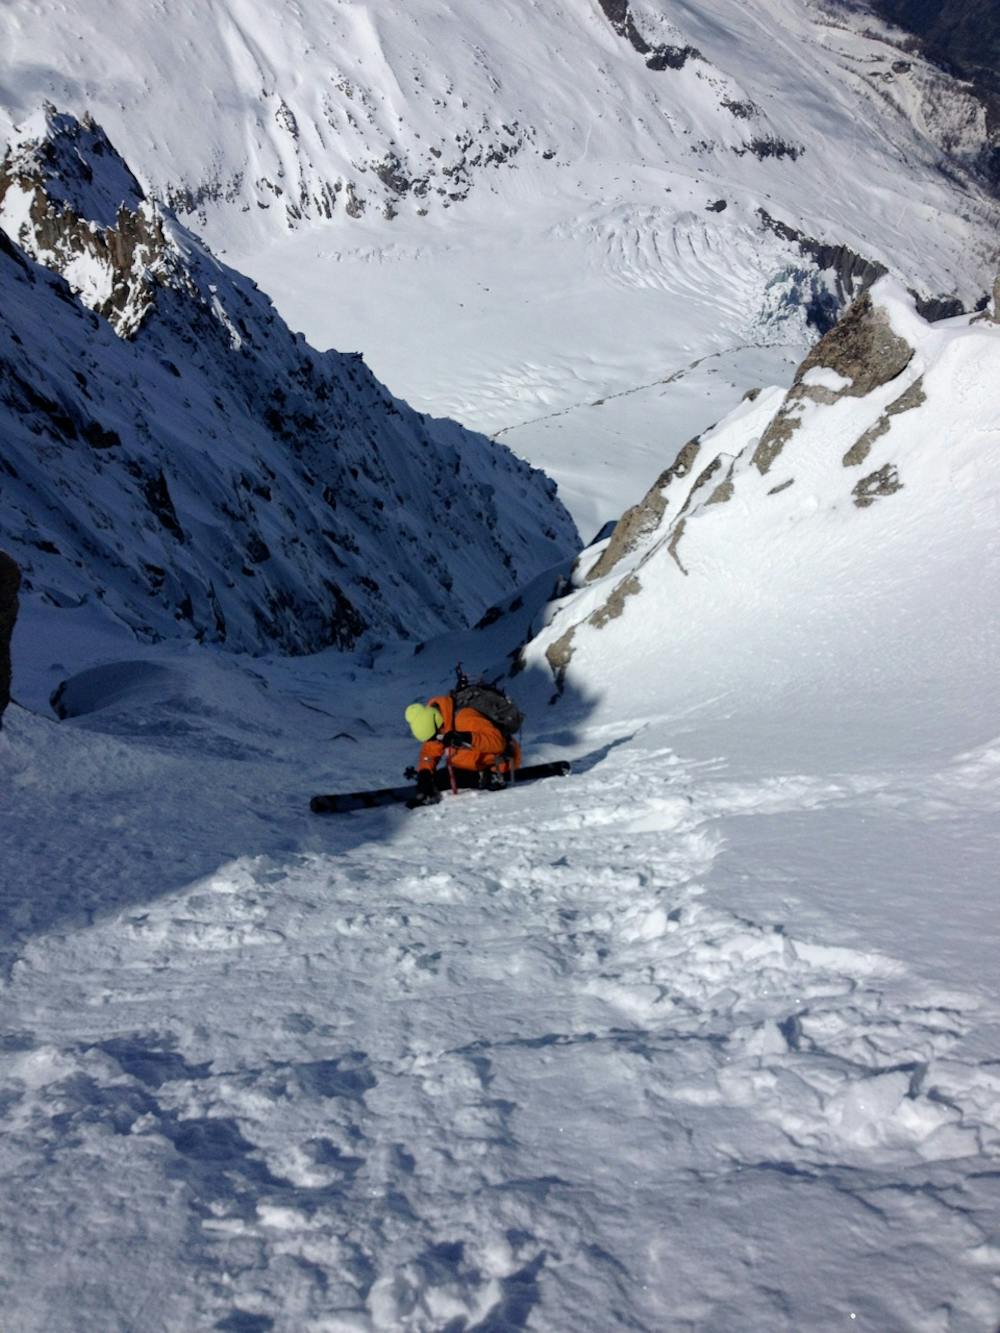 Entering the steep and technical lower couloir shortly after leaving the Col Adams Reilly.